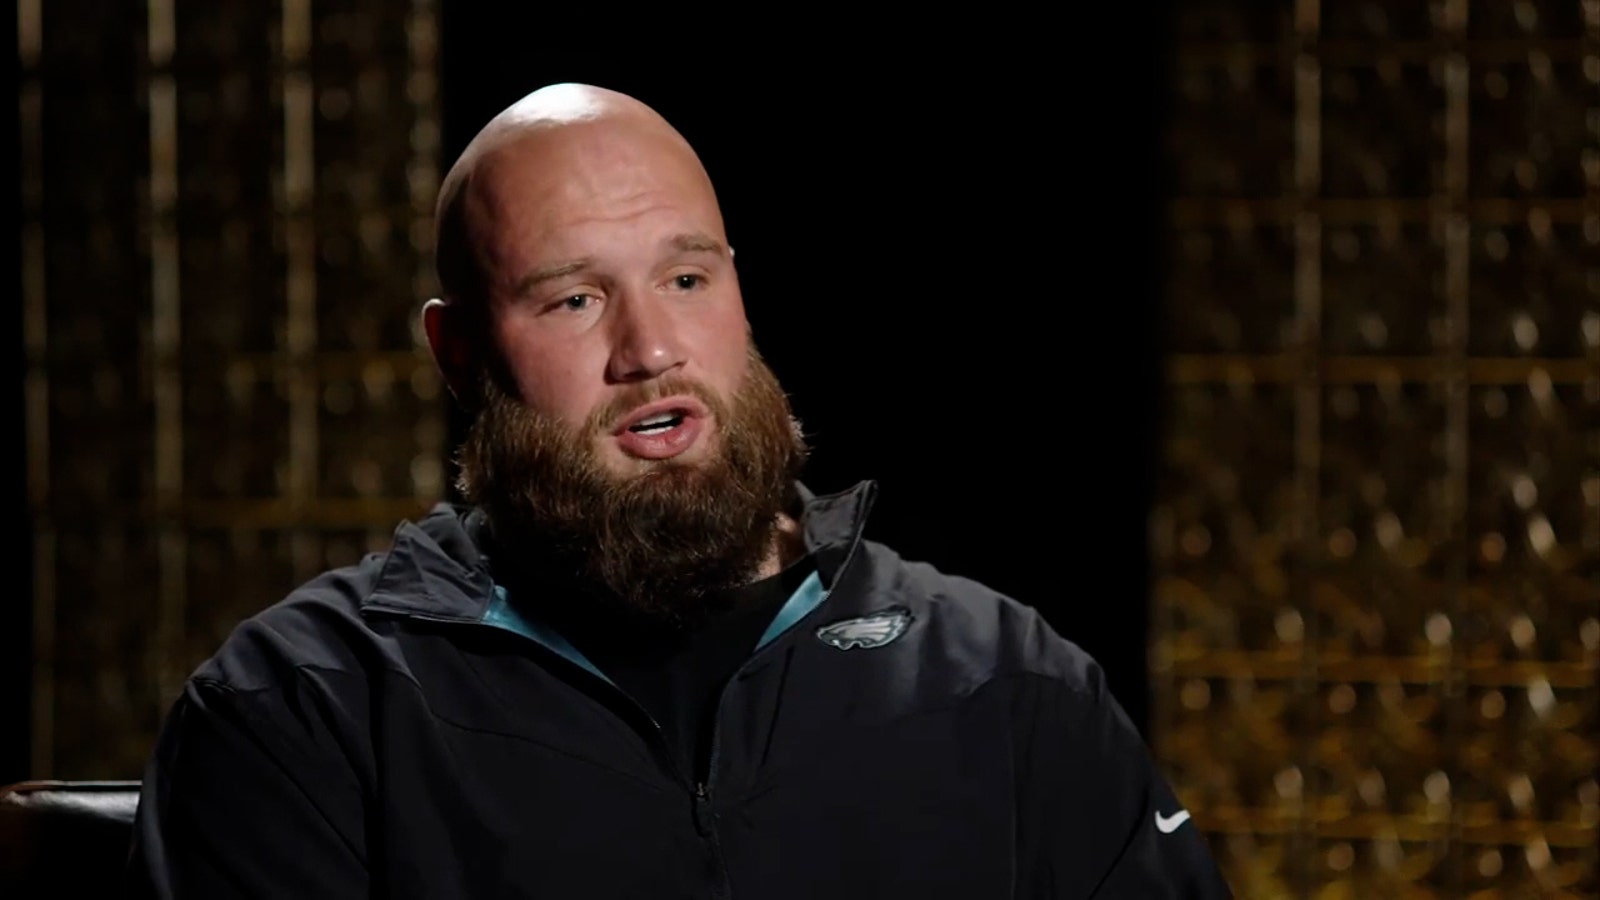 Lane Johnson opens up about mental health